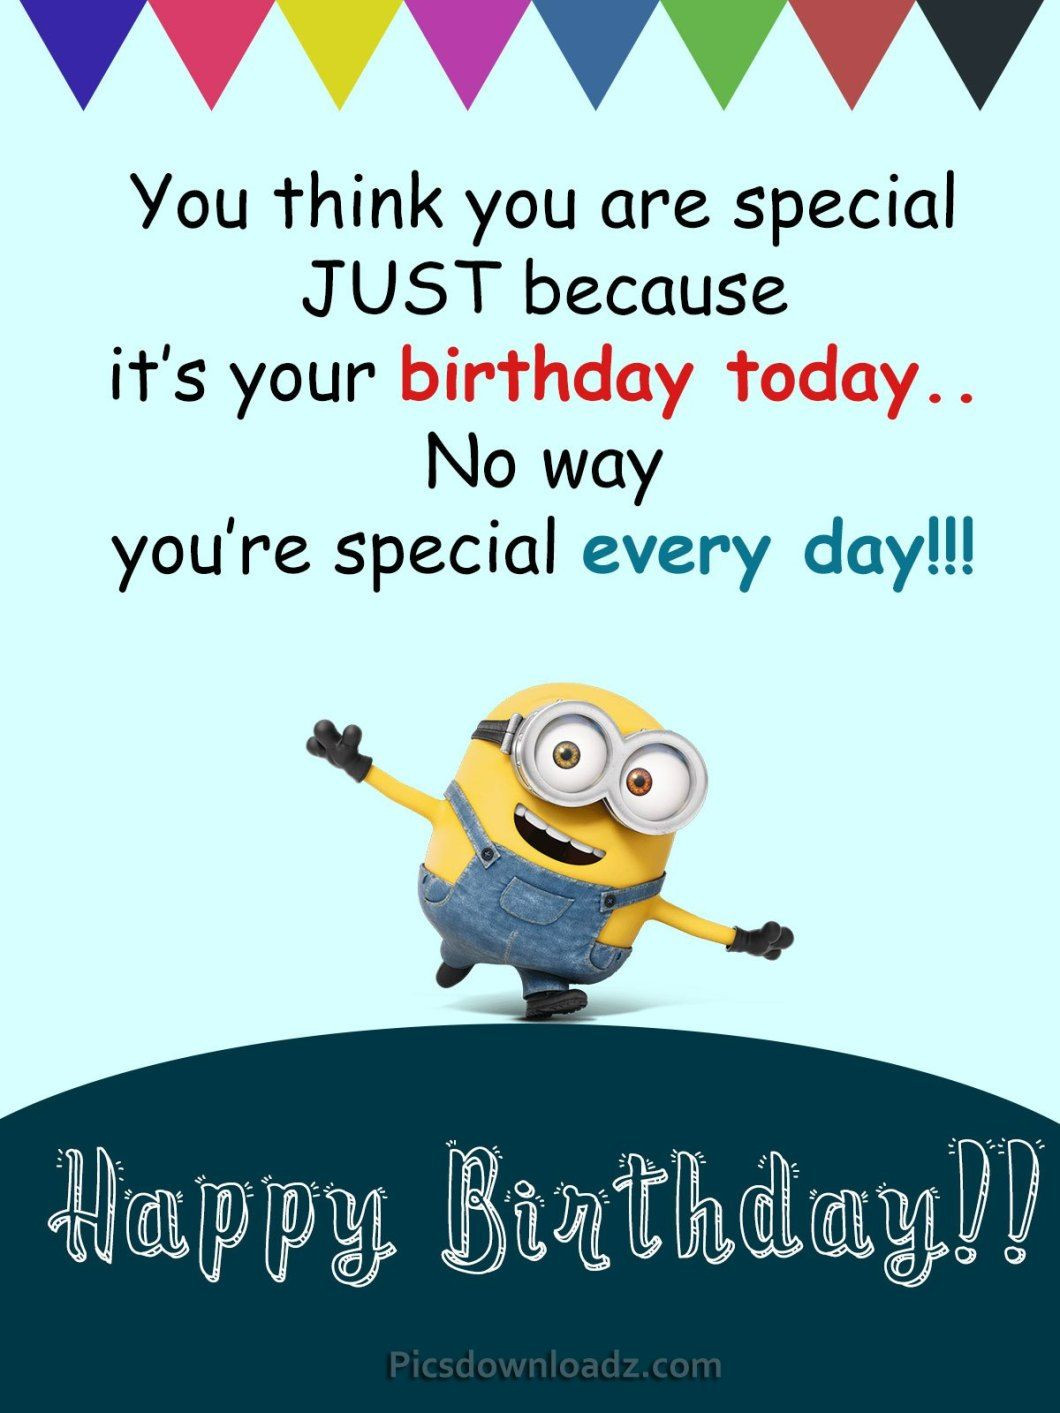 Funny Birthday Greetings To A Friend
 Funny Happy Birthday Wishes for Best Friend – Happy